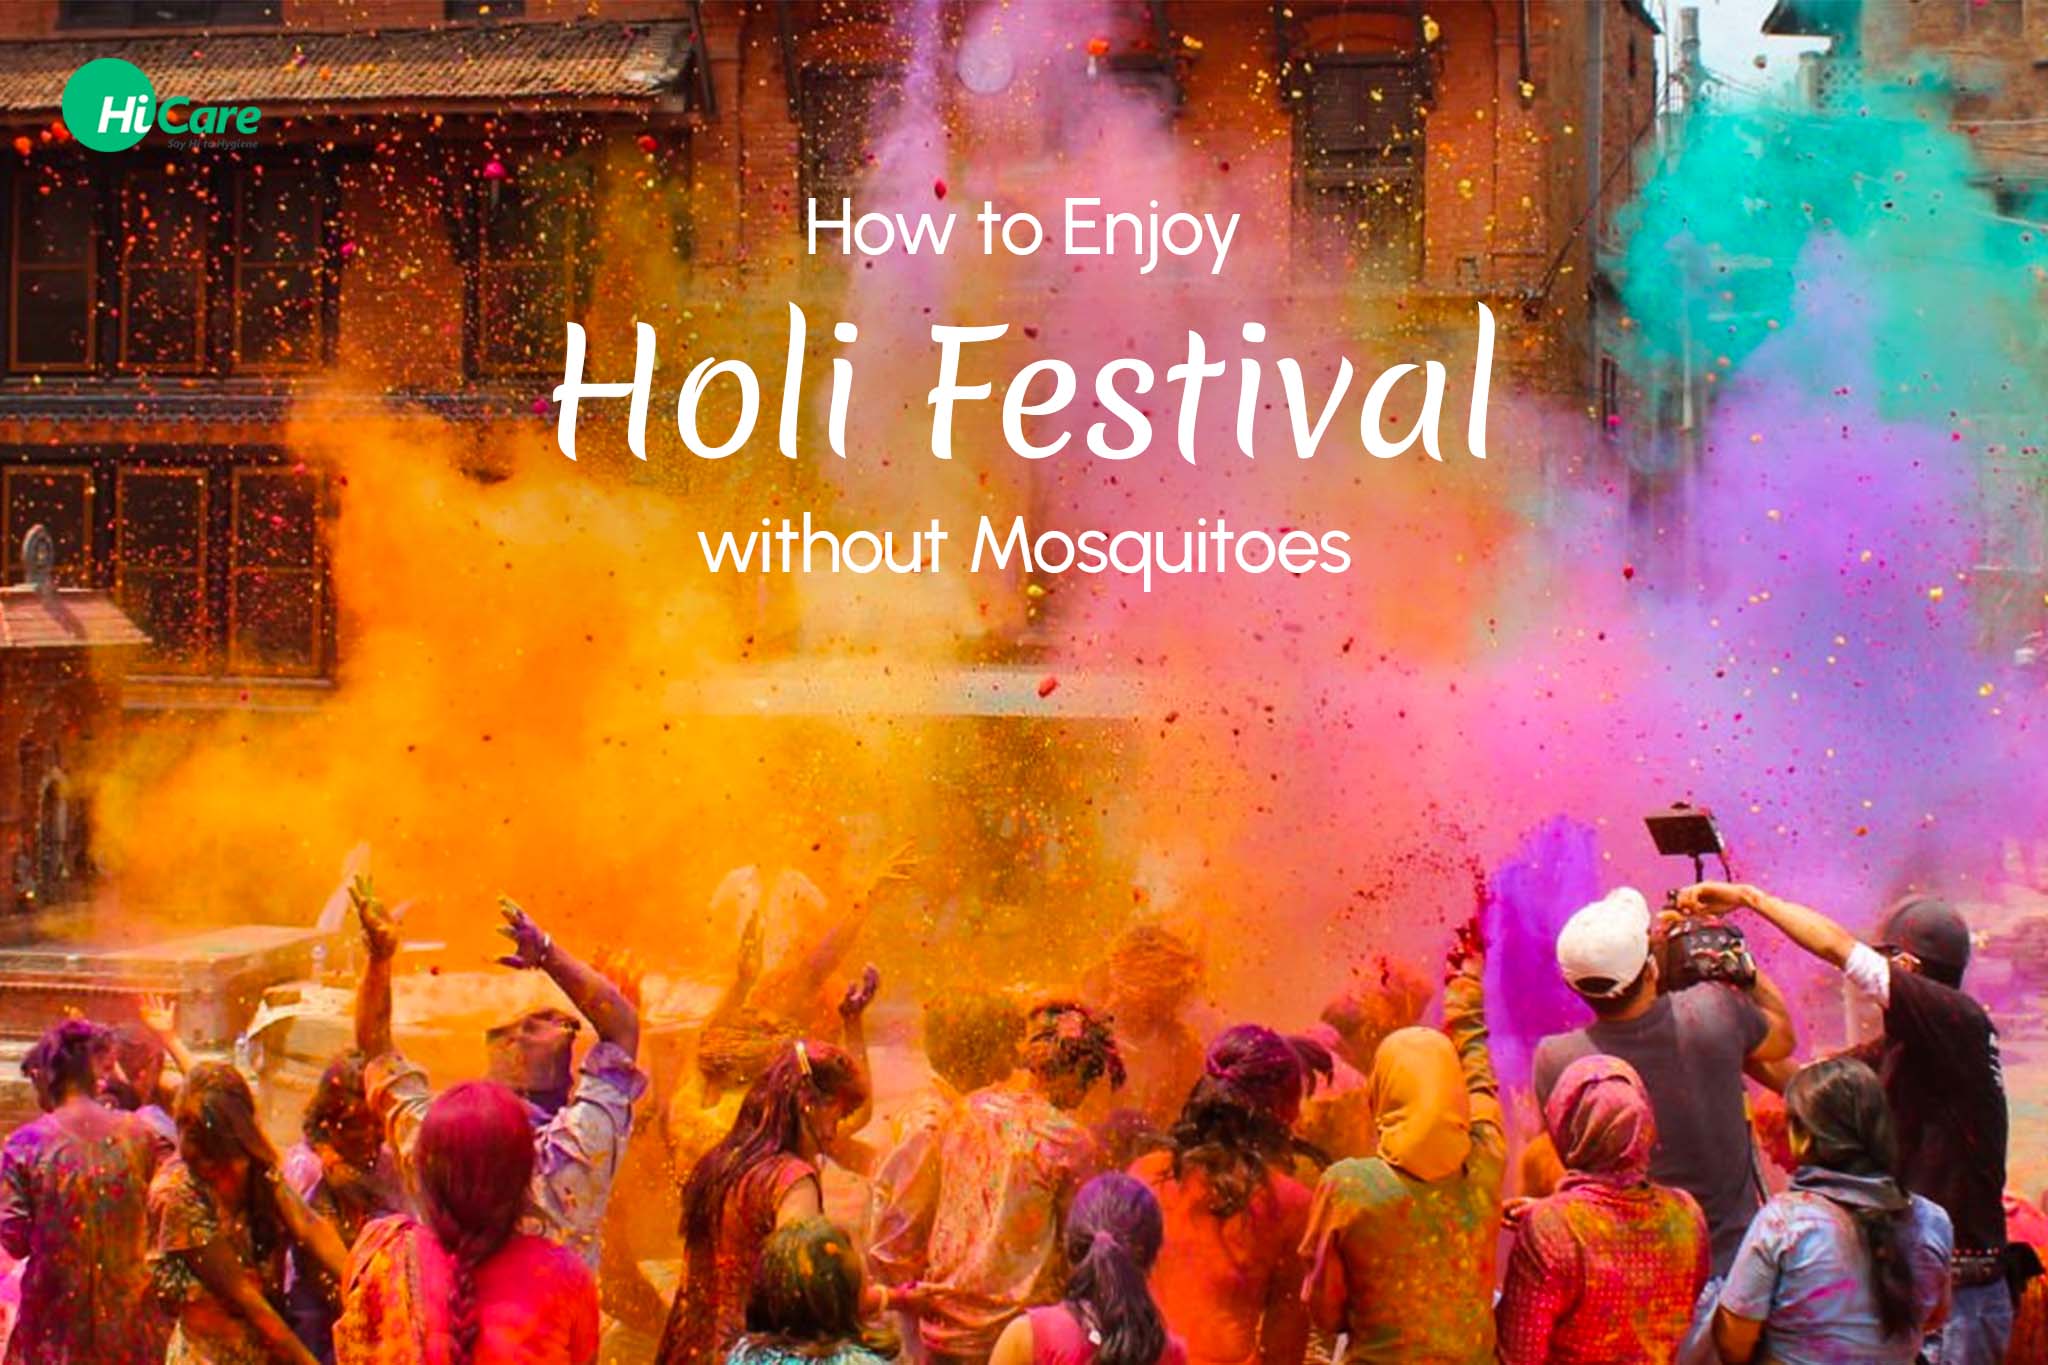 How to Enjoy the Holi Festival without Mosquitoes?